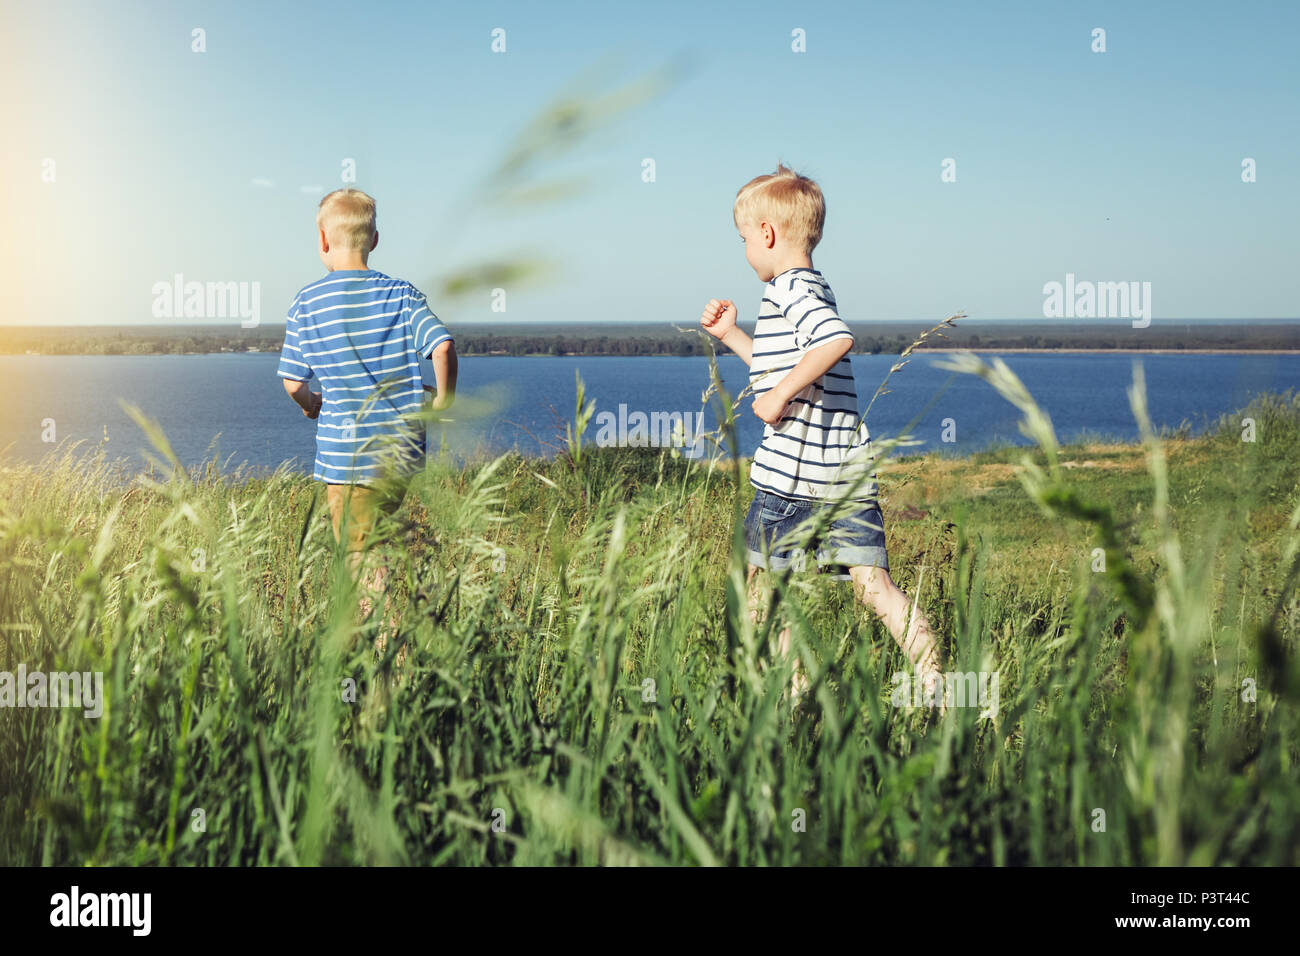 Two boys in striped t-shirts running out on the field. Summer leisure and friendship concept. Stock Photo